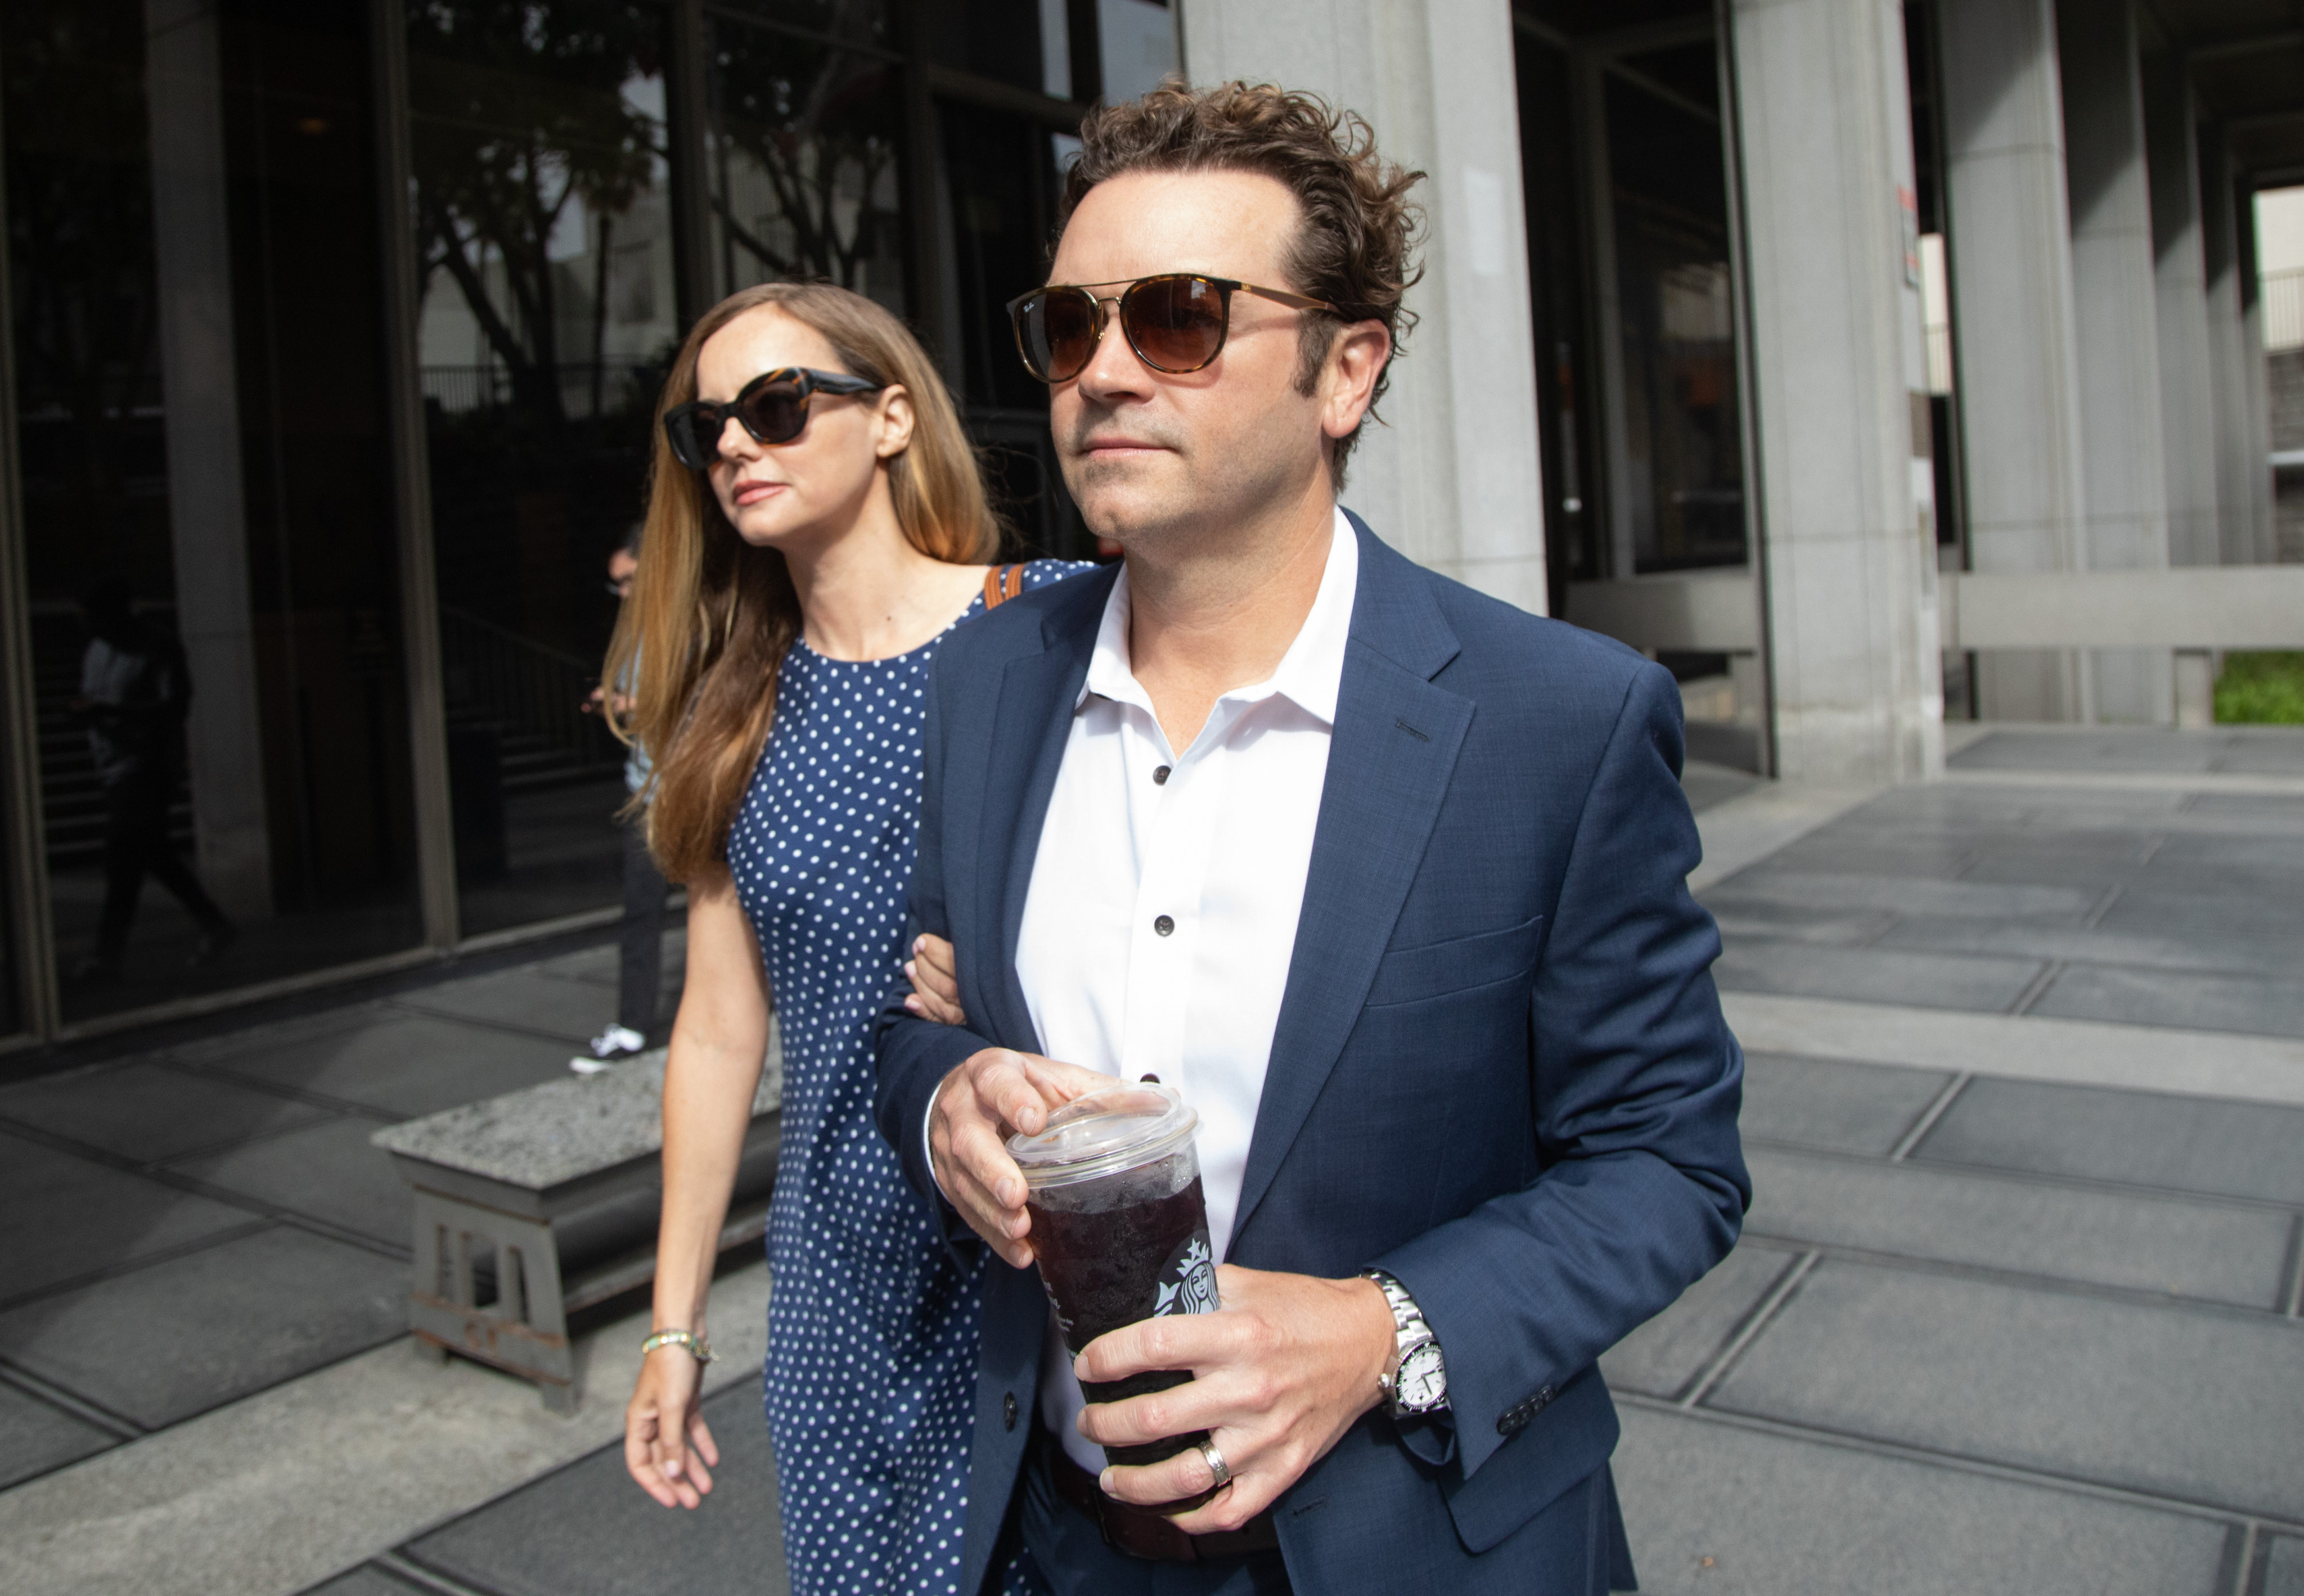 Actor Danny Masterson and his wife, Bijou Phillips, arrive at Clara Shortridge Foltz Criminal Justice Centre in Los Angeles, US on on Wednesday. Photo: Los Angeles Times / TNS